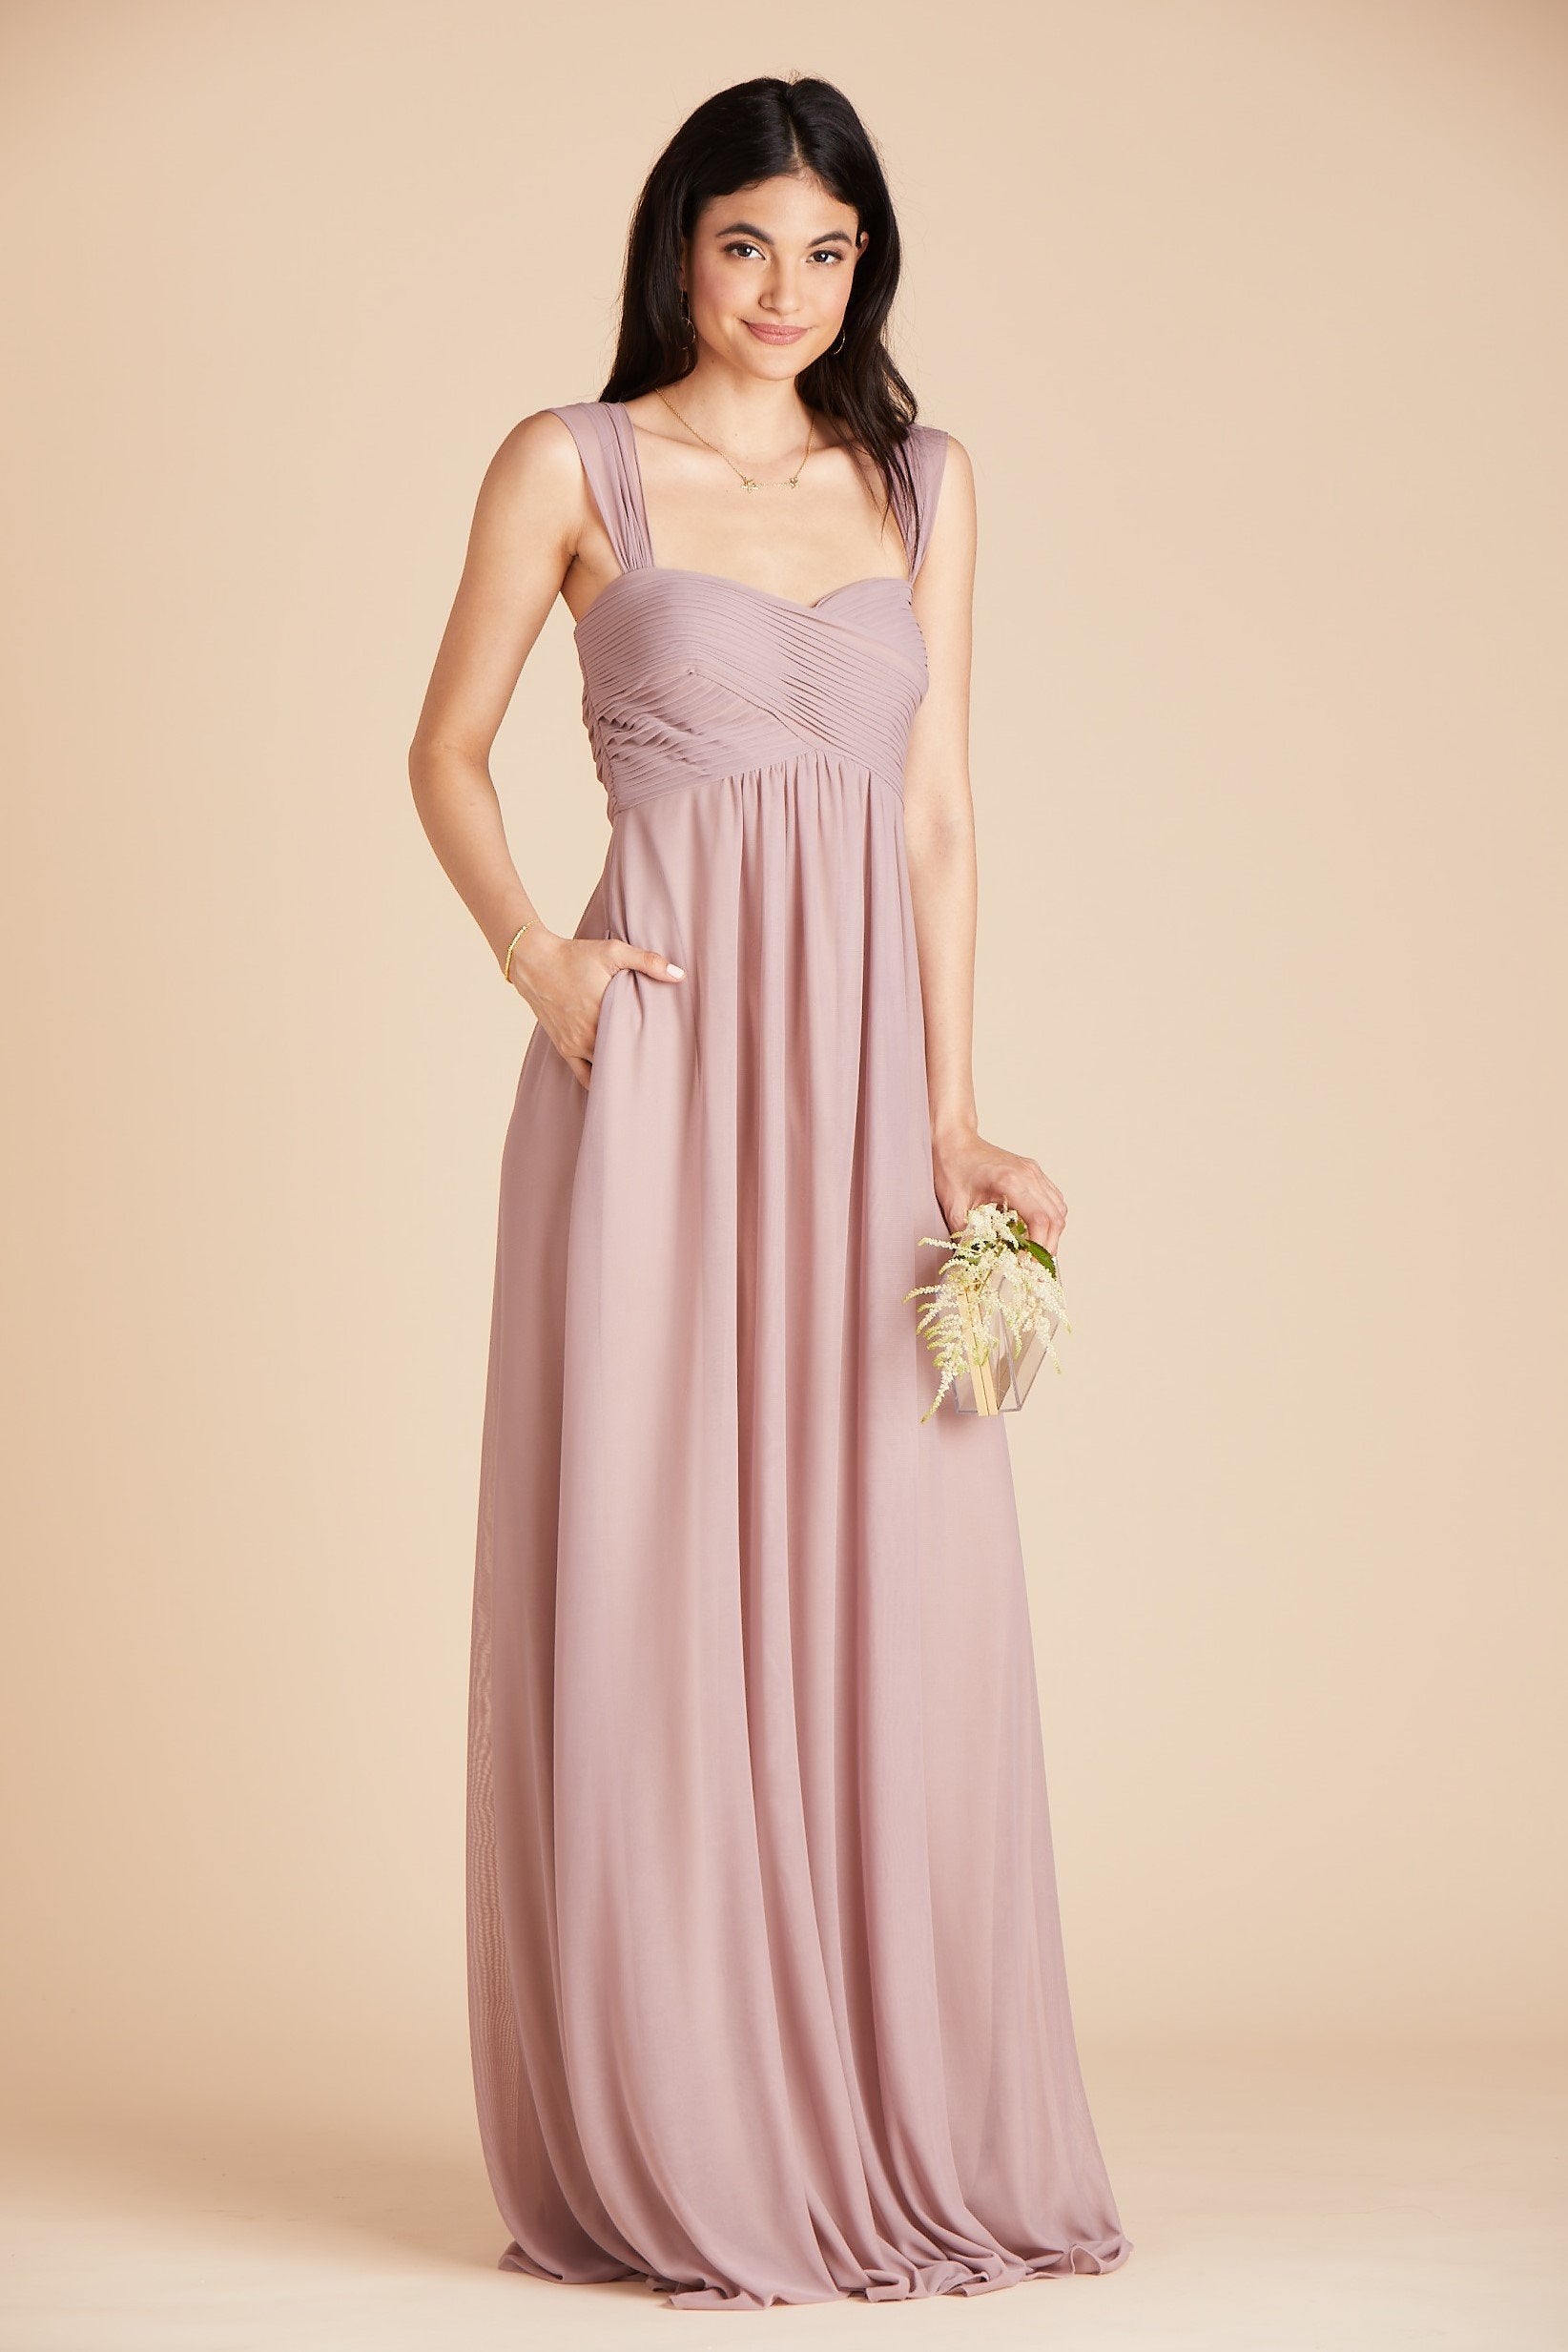 Maria convertible bridesmaids dress in mauve chiffon by Birdy Grey, side view with hand in pocket